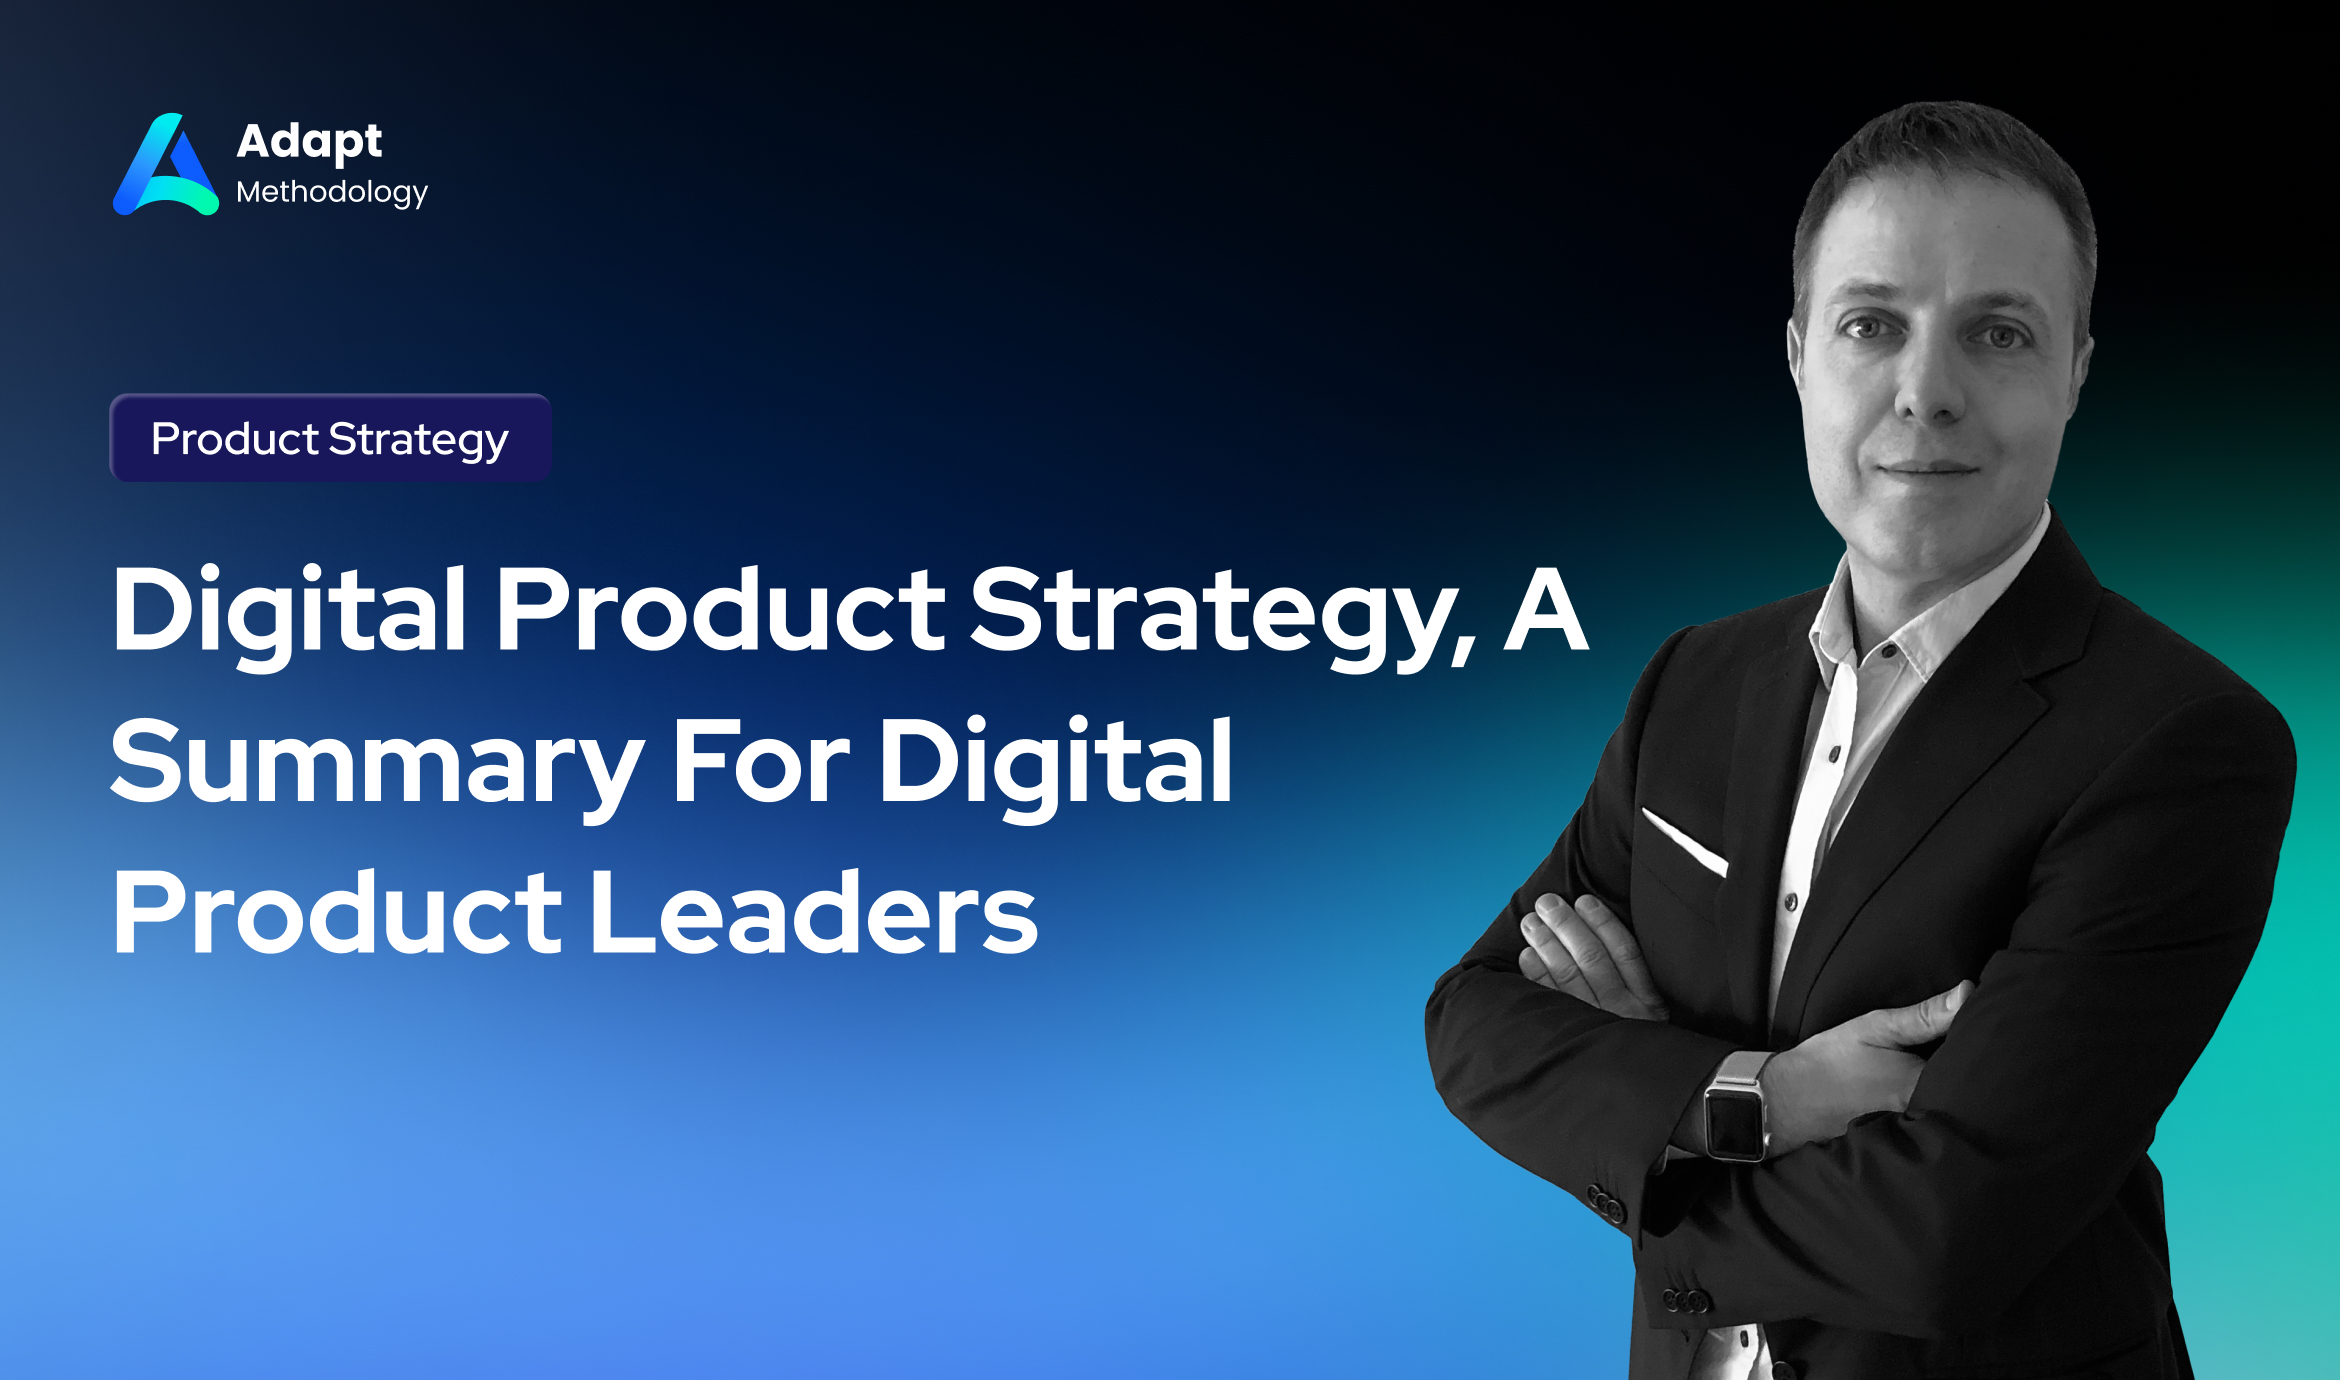 Digital Product Strategy, A Summary For Digital Product Leaders